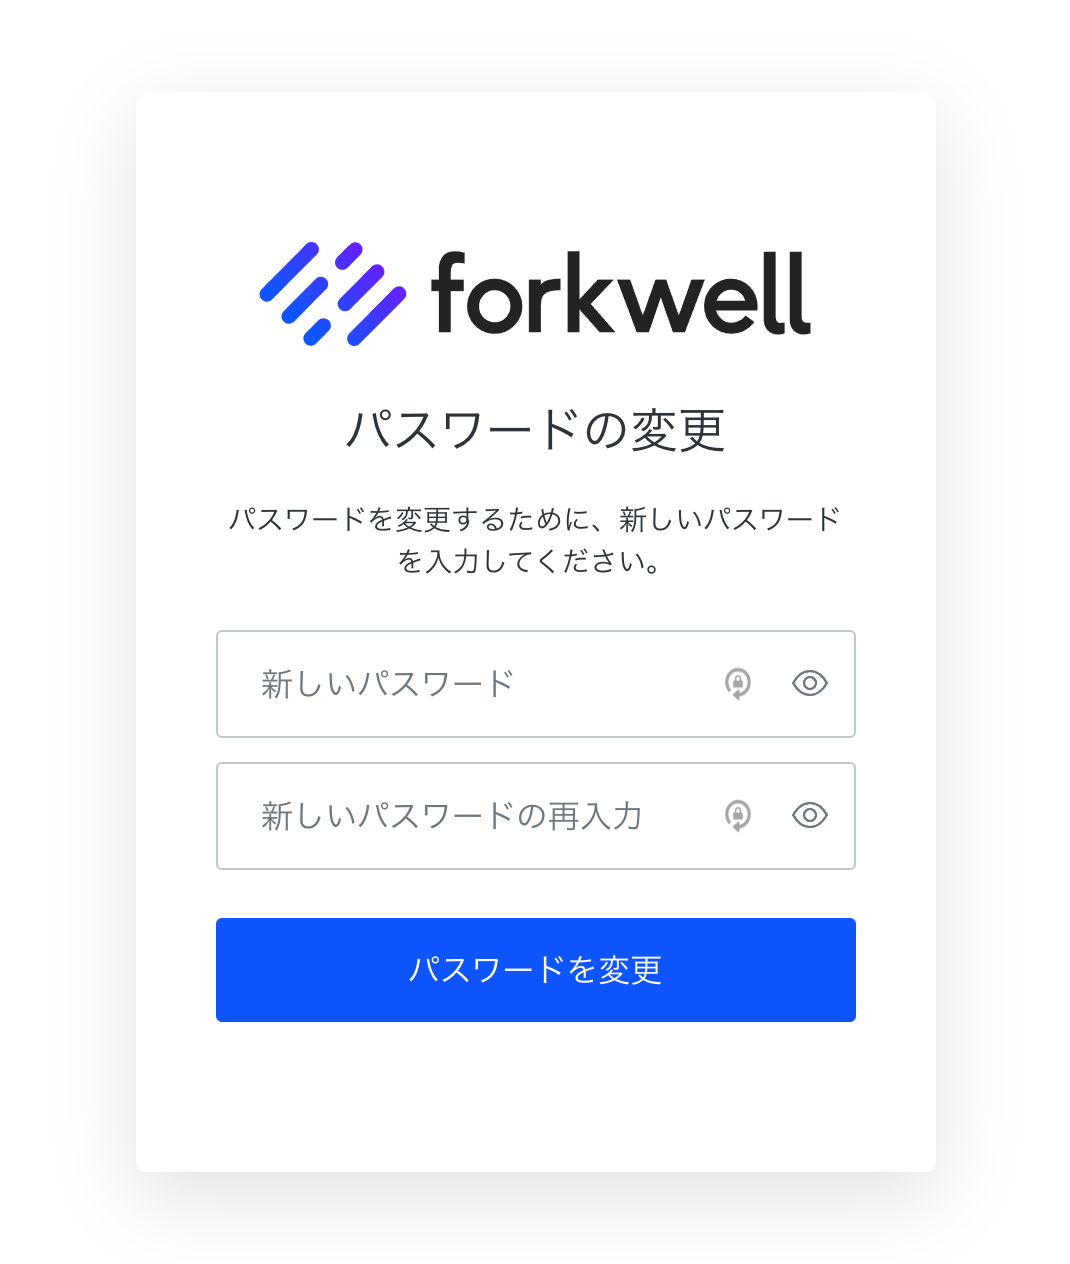 B_5.___________Forkwell_____________________.png